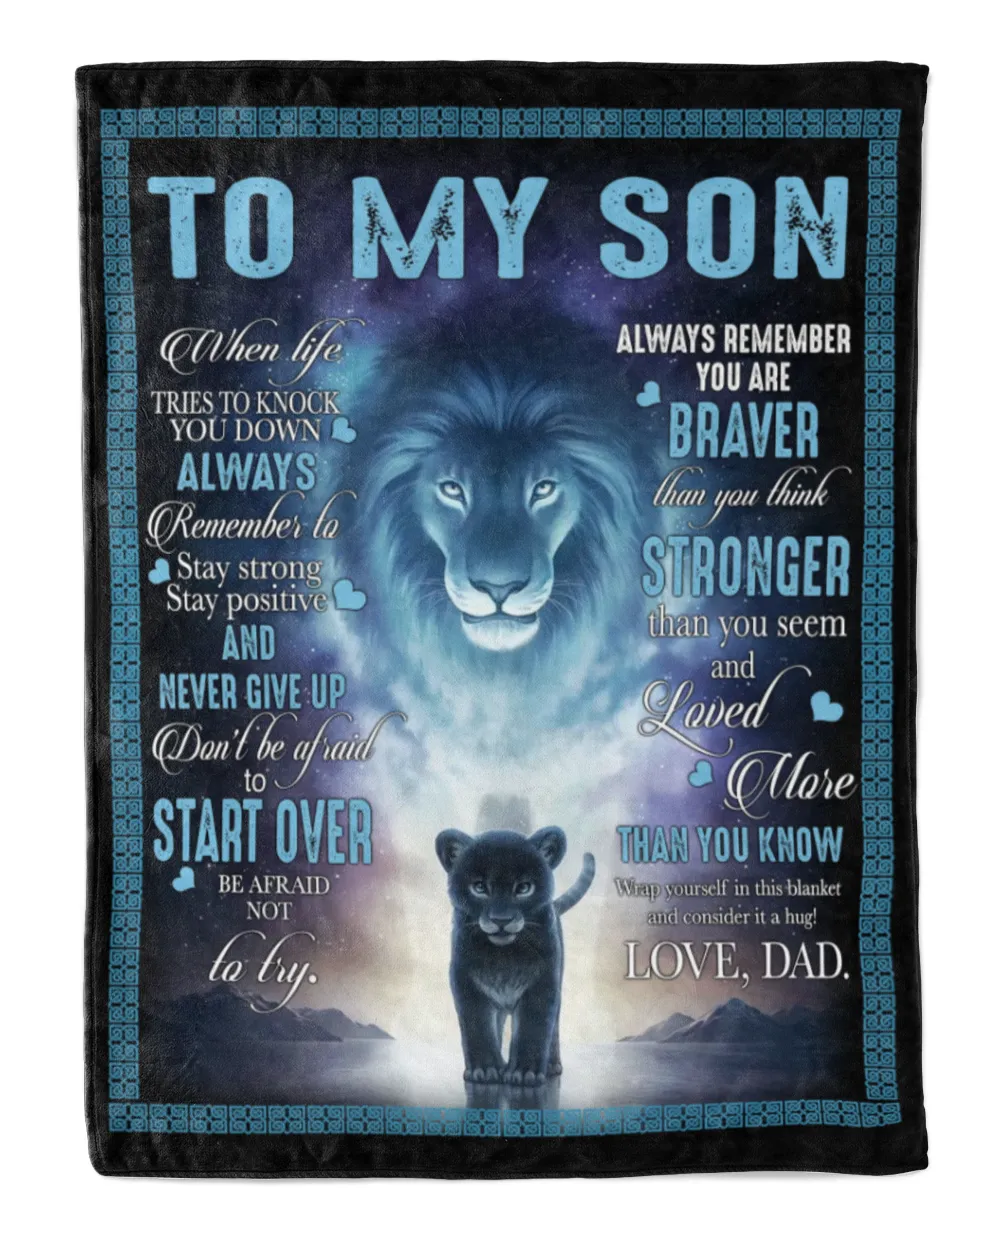 To my son - Gift for son